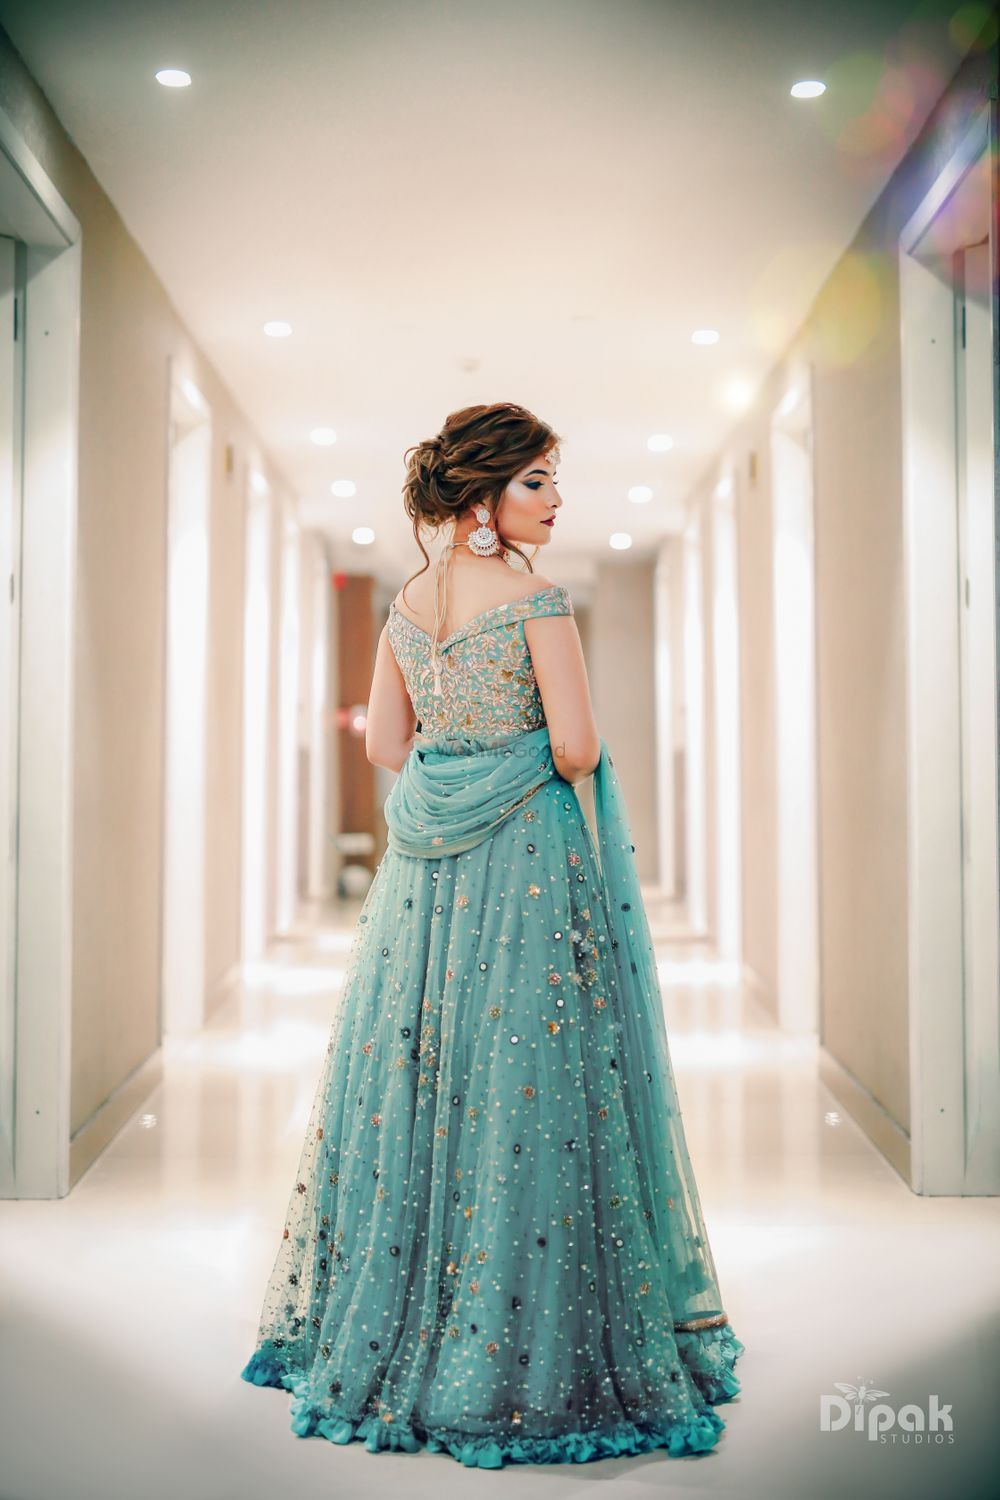 Photo of A stunning look of a bride in an off-shoulder blue lehenga.